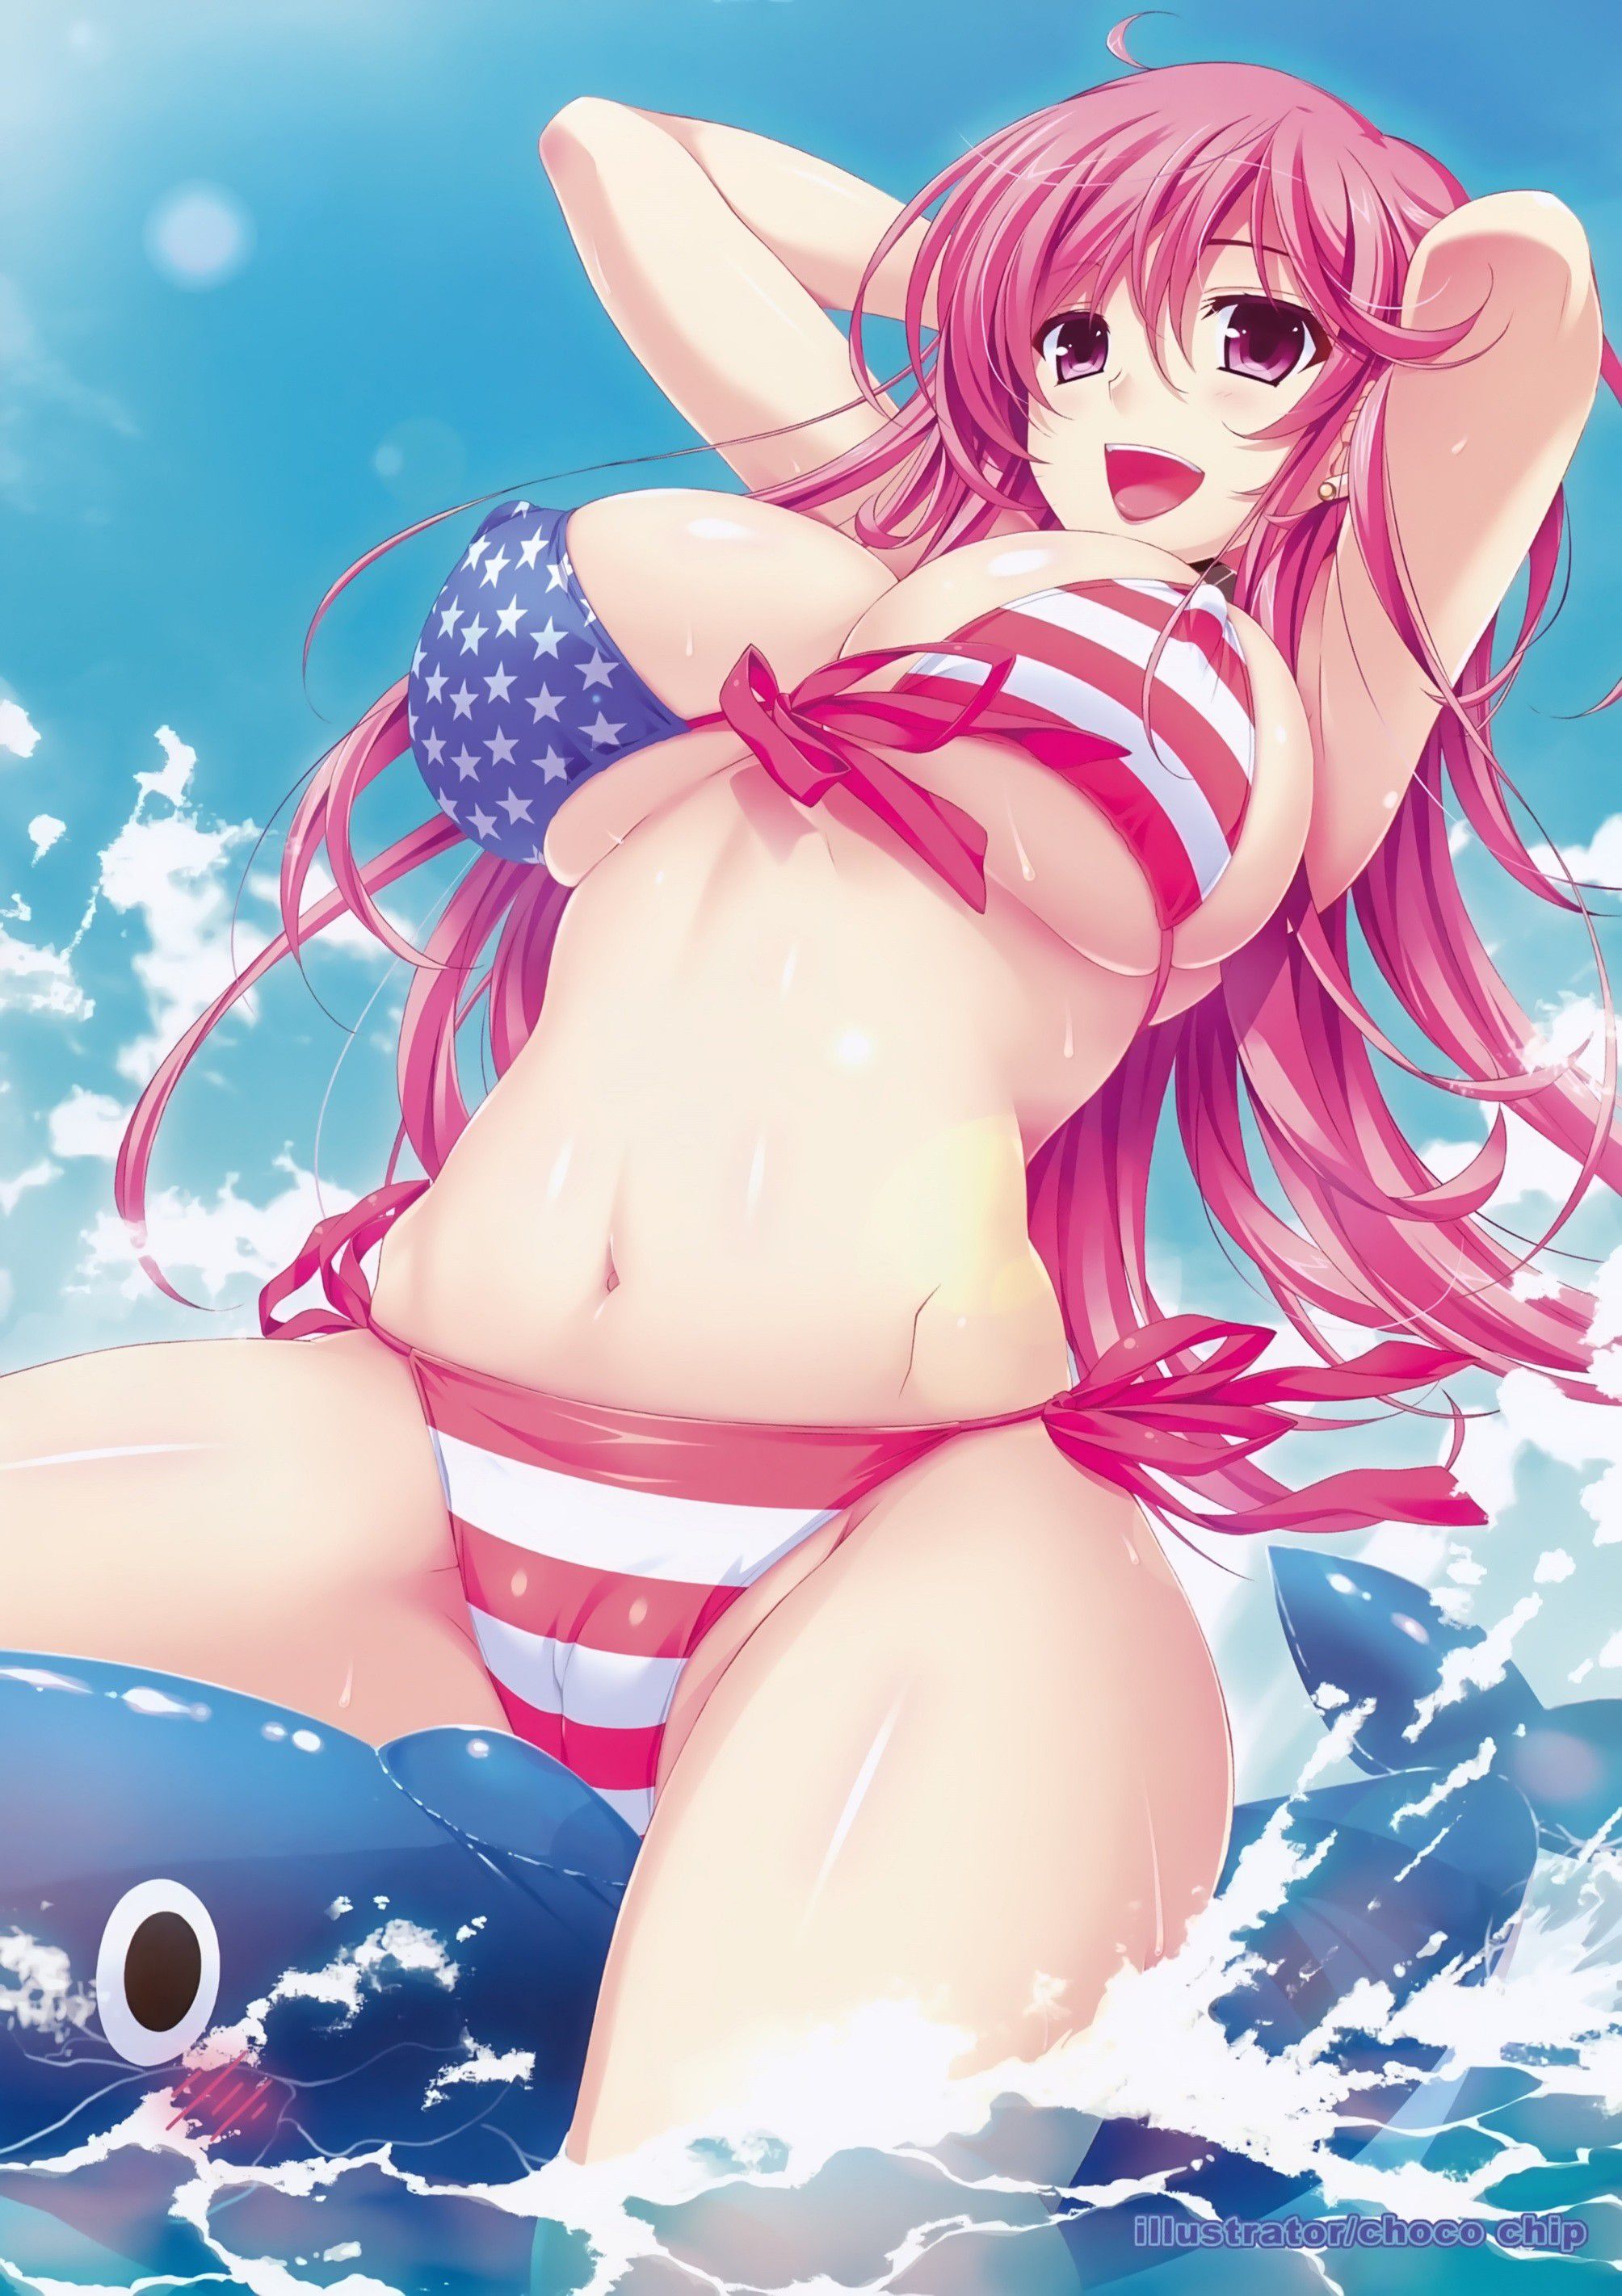 The swimsuit that wants to see the image of a swimsuit is lewd. That cloth area 13